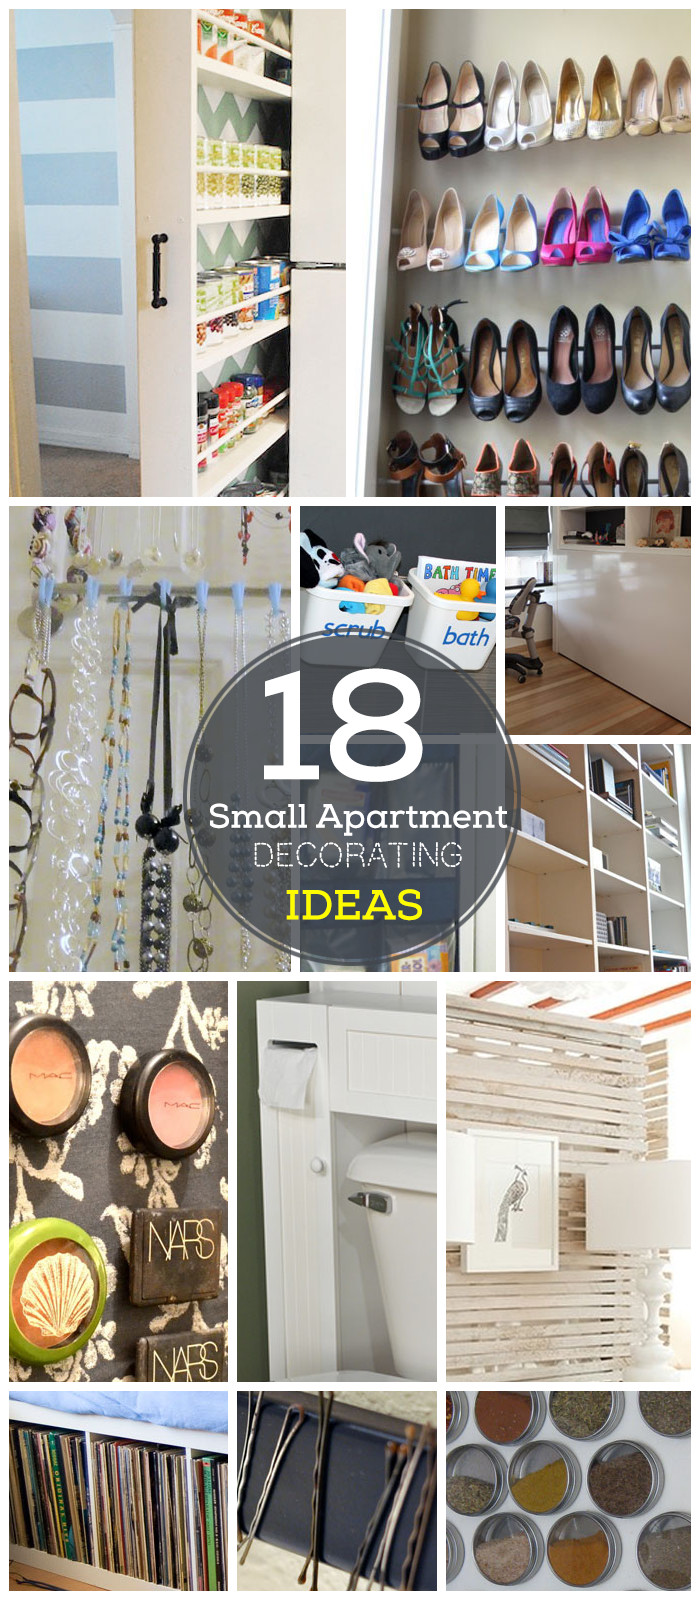 Best ideas about Storage Ideas For Small Spaces On A Budget
. Save or Pin 18 DIY Small Apartment Decorating Ideas on a Bud Now.